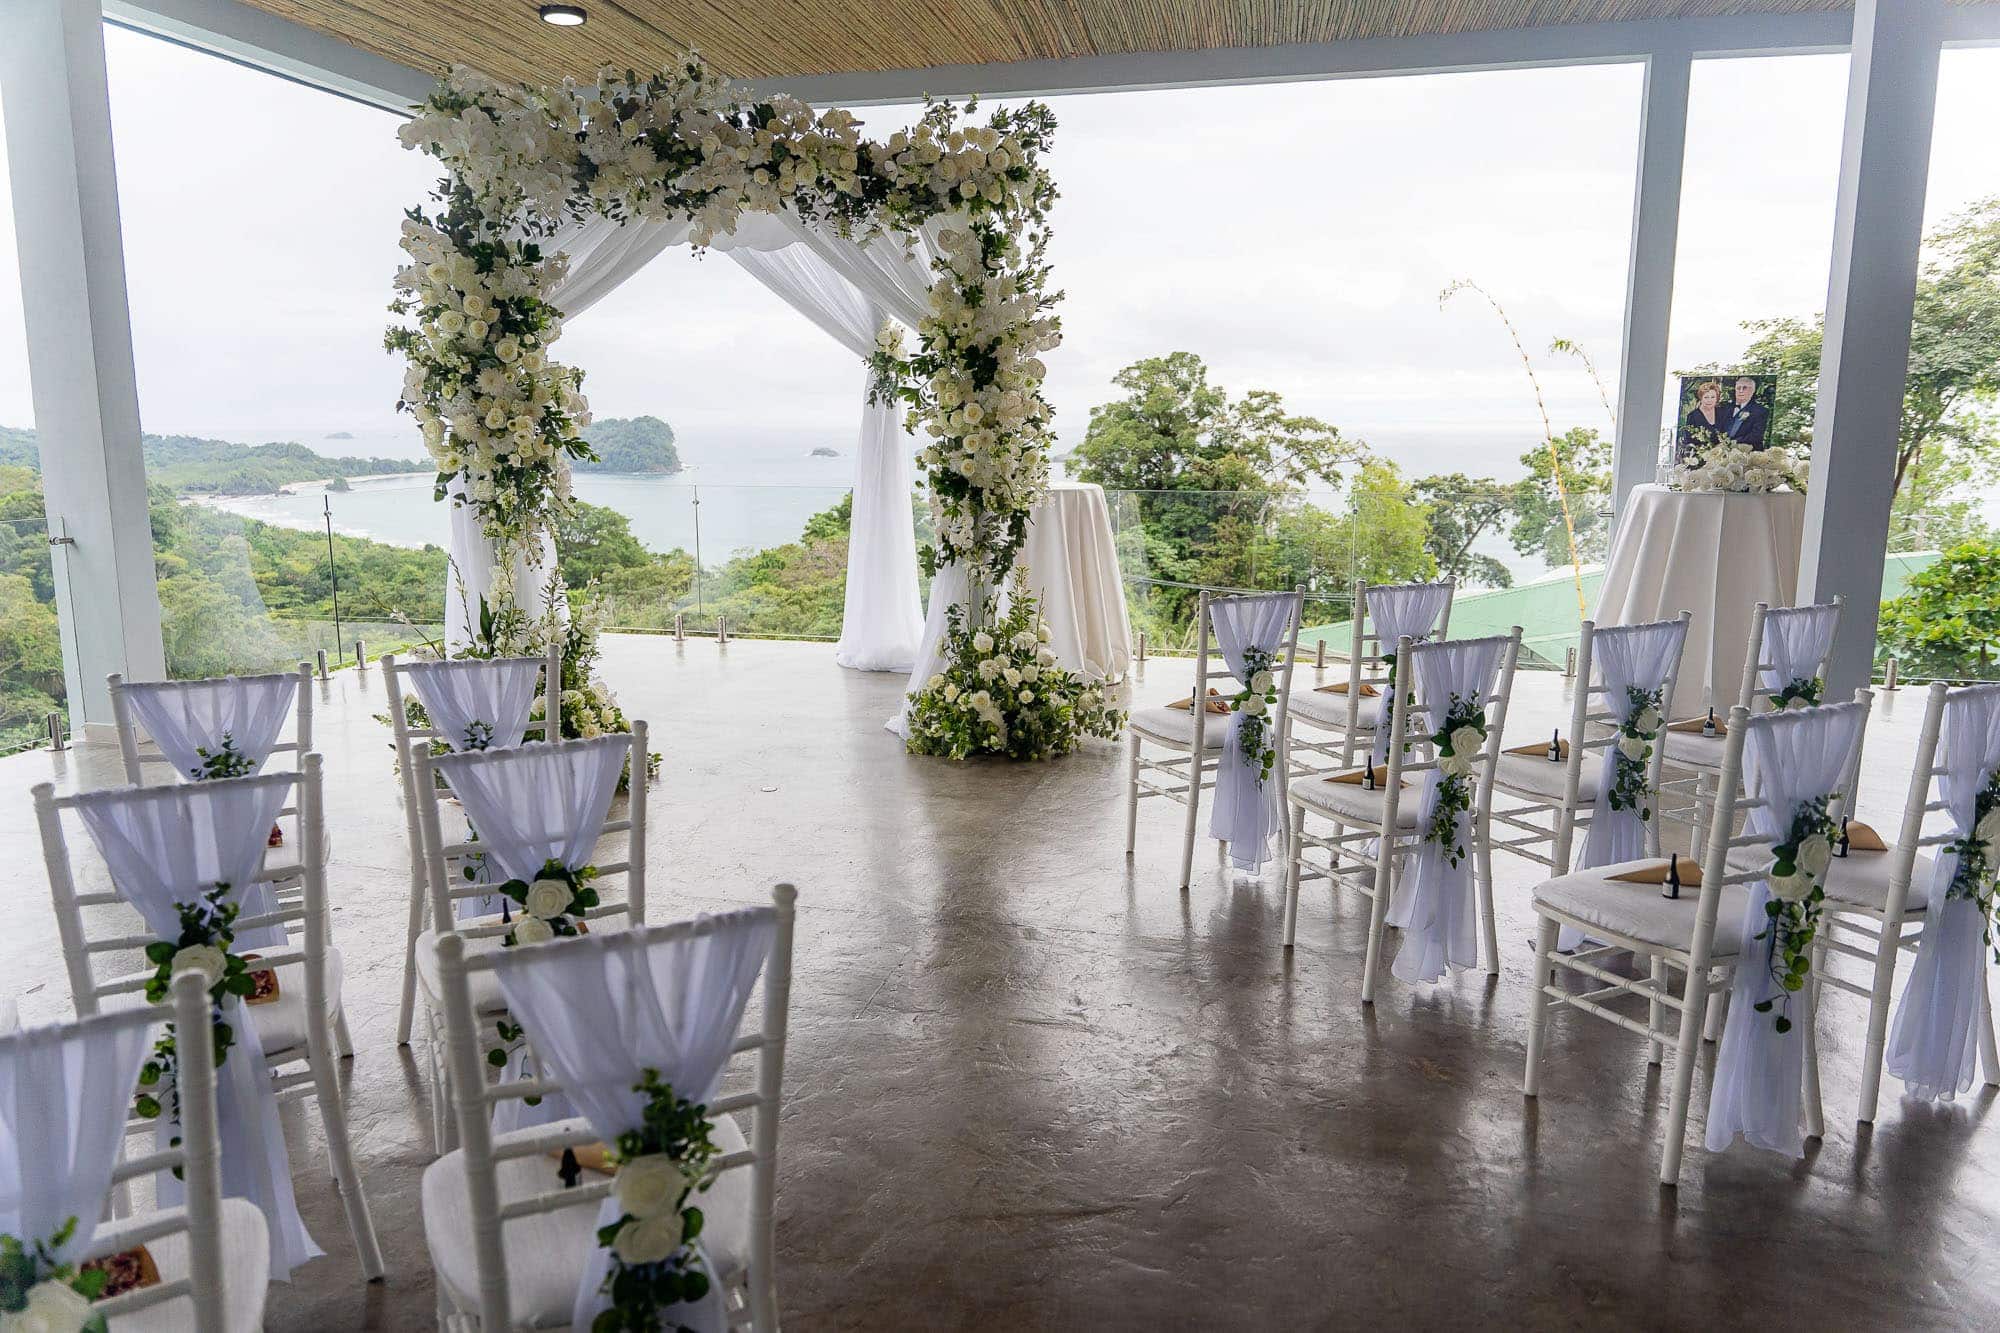 The ceremony site with a view of the ocean